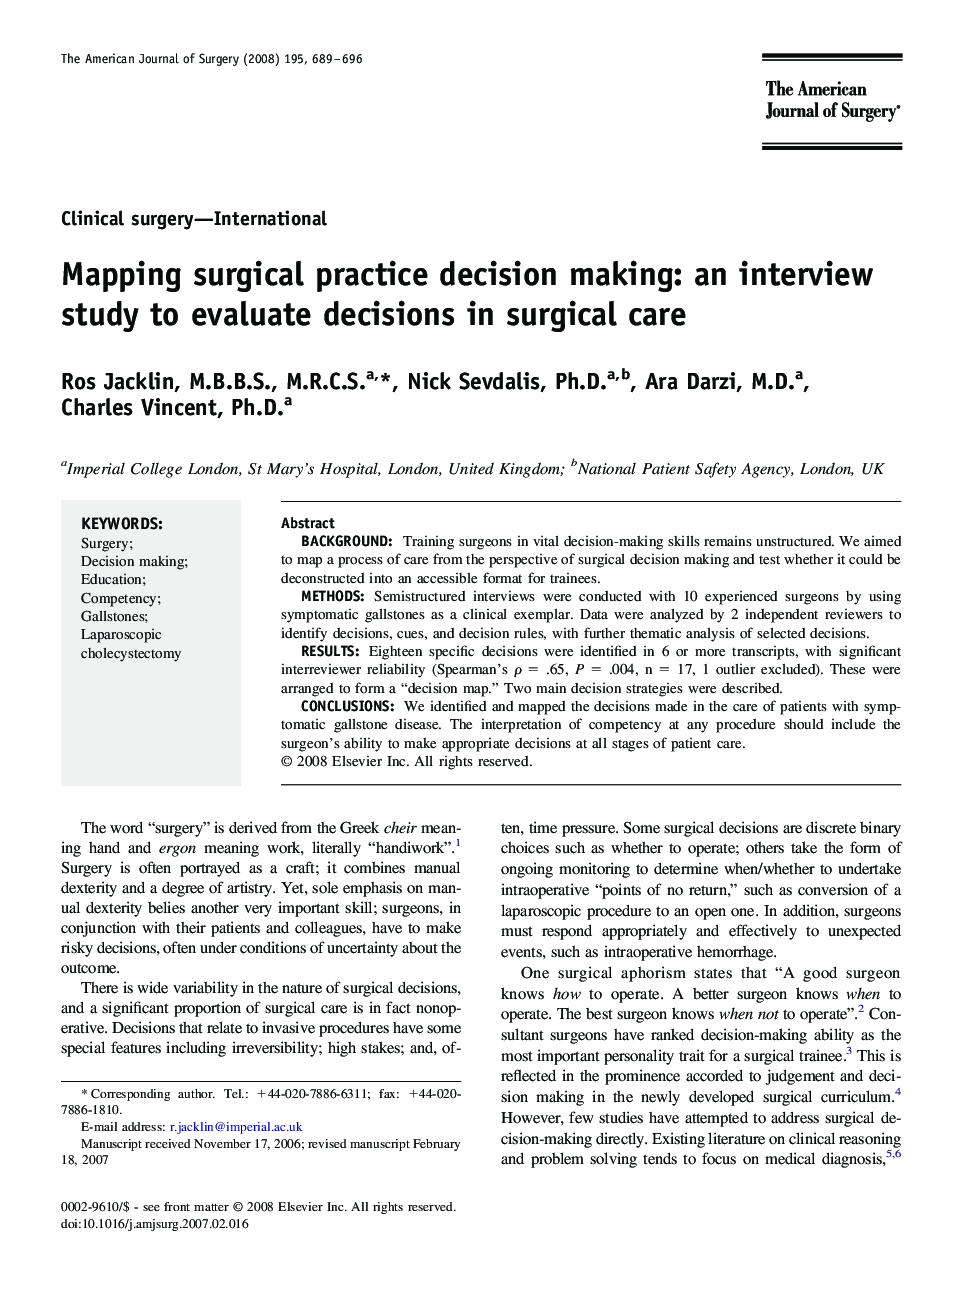 Mapping surgical practice decision making: an interview study to evaluate decisions in surgical care